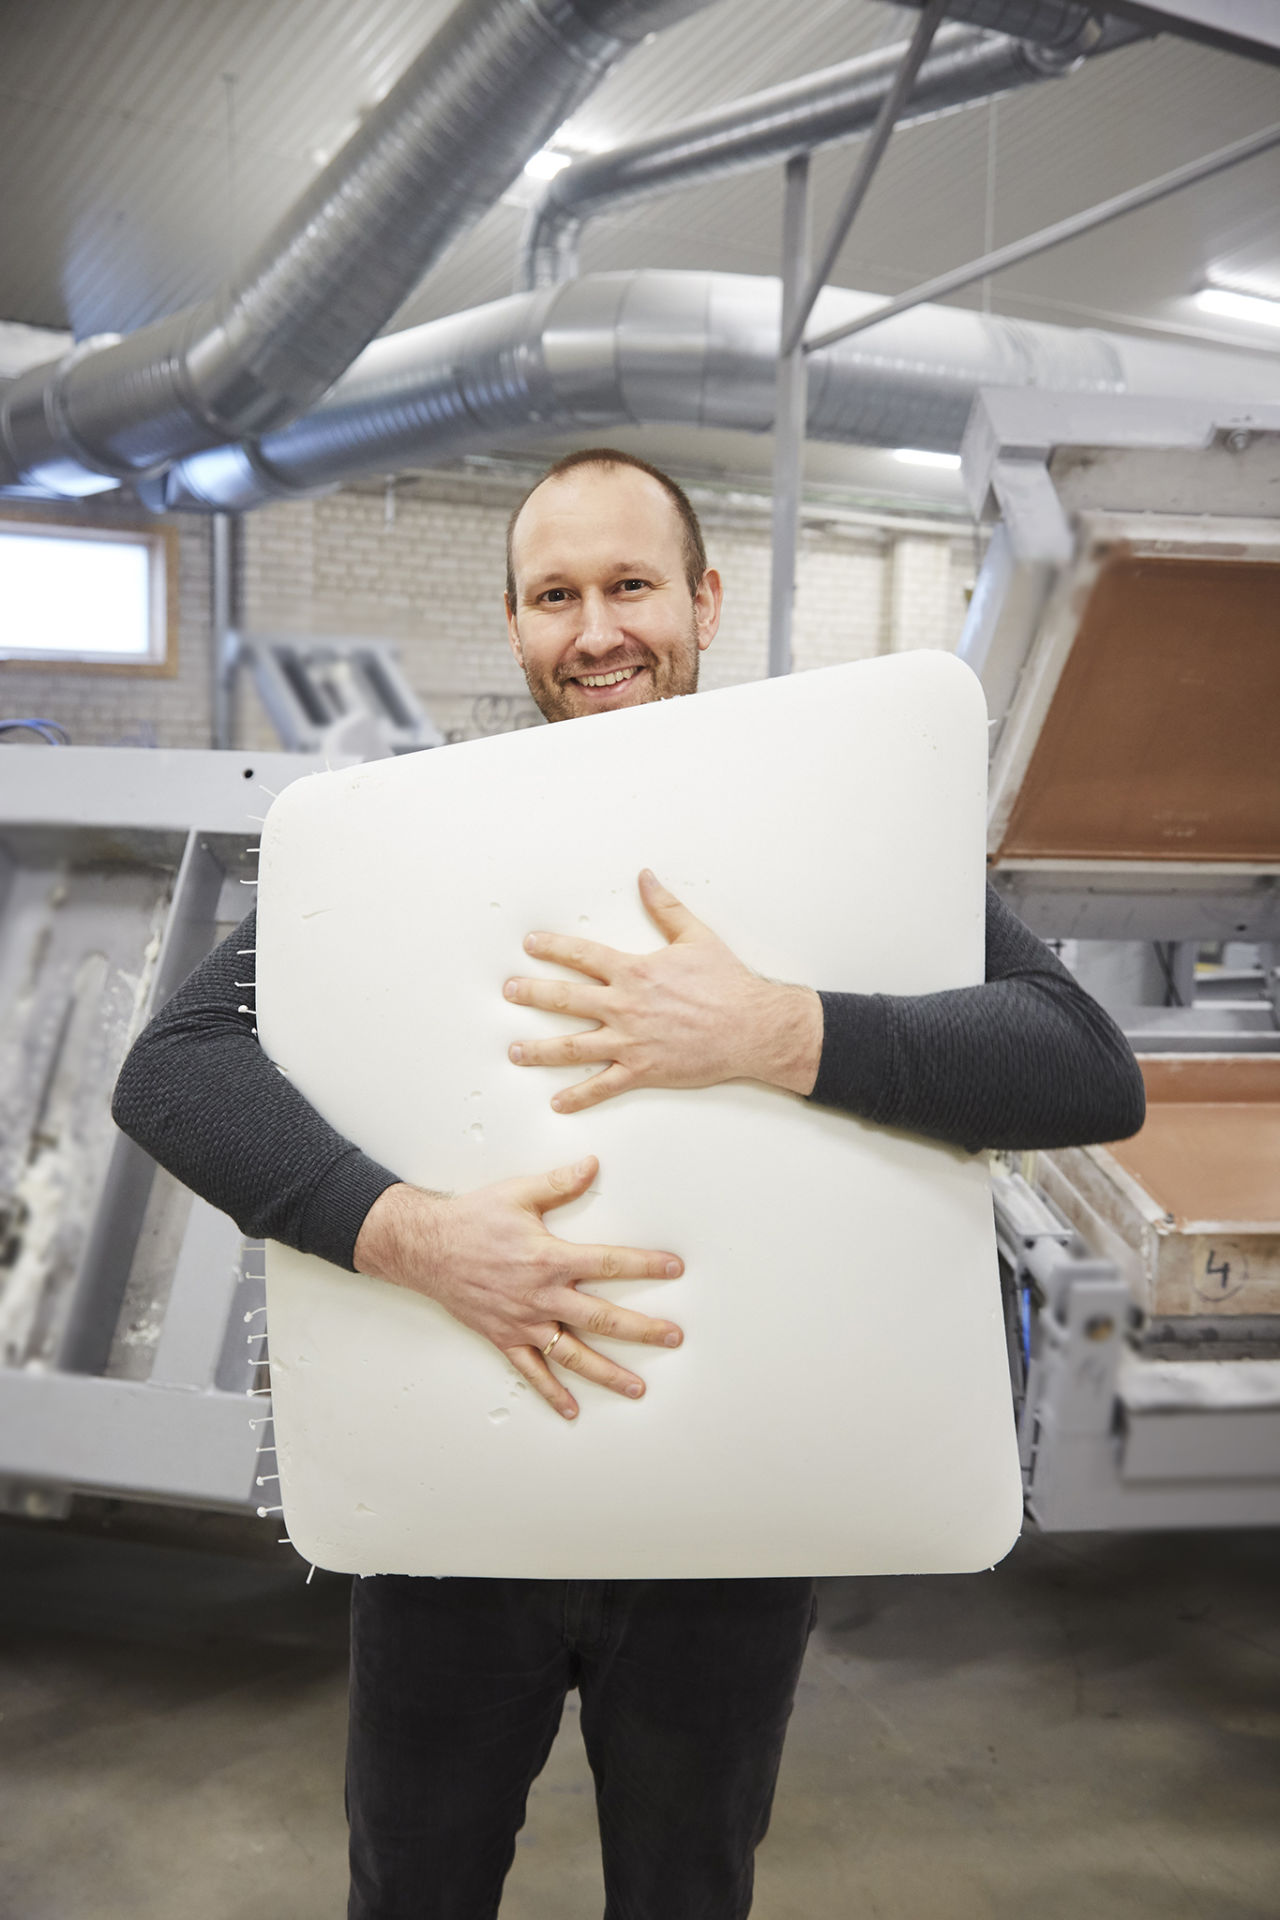 An editorial image from behind the scenes of making Kumo Sofa.